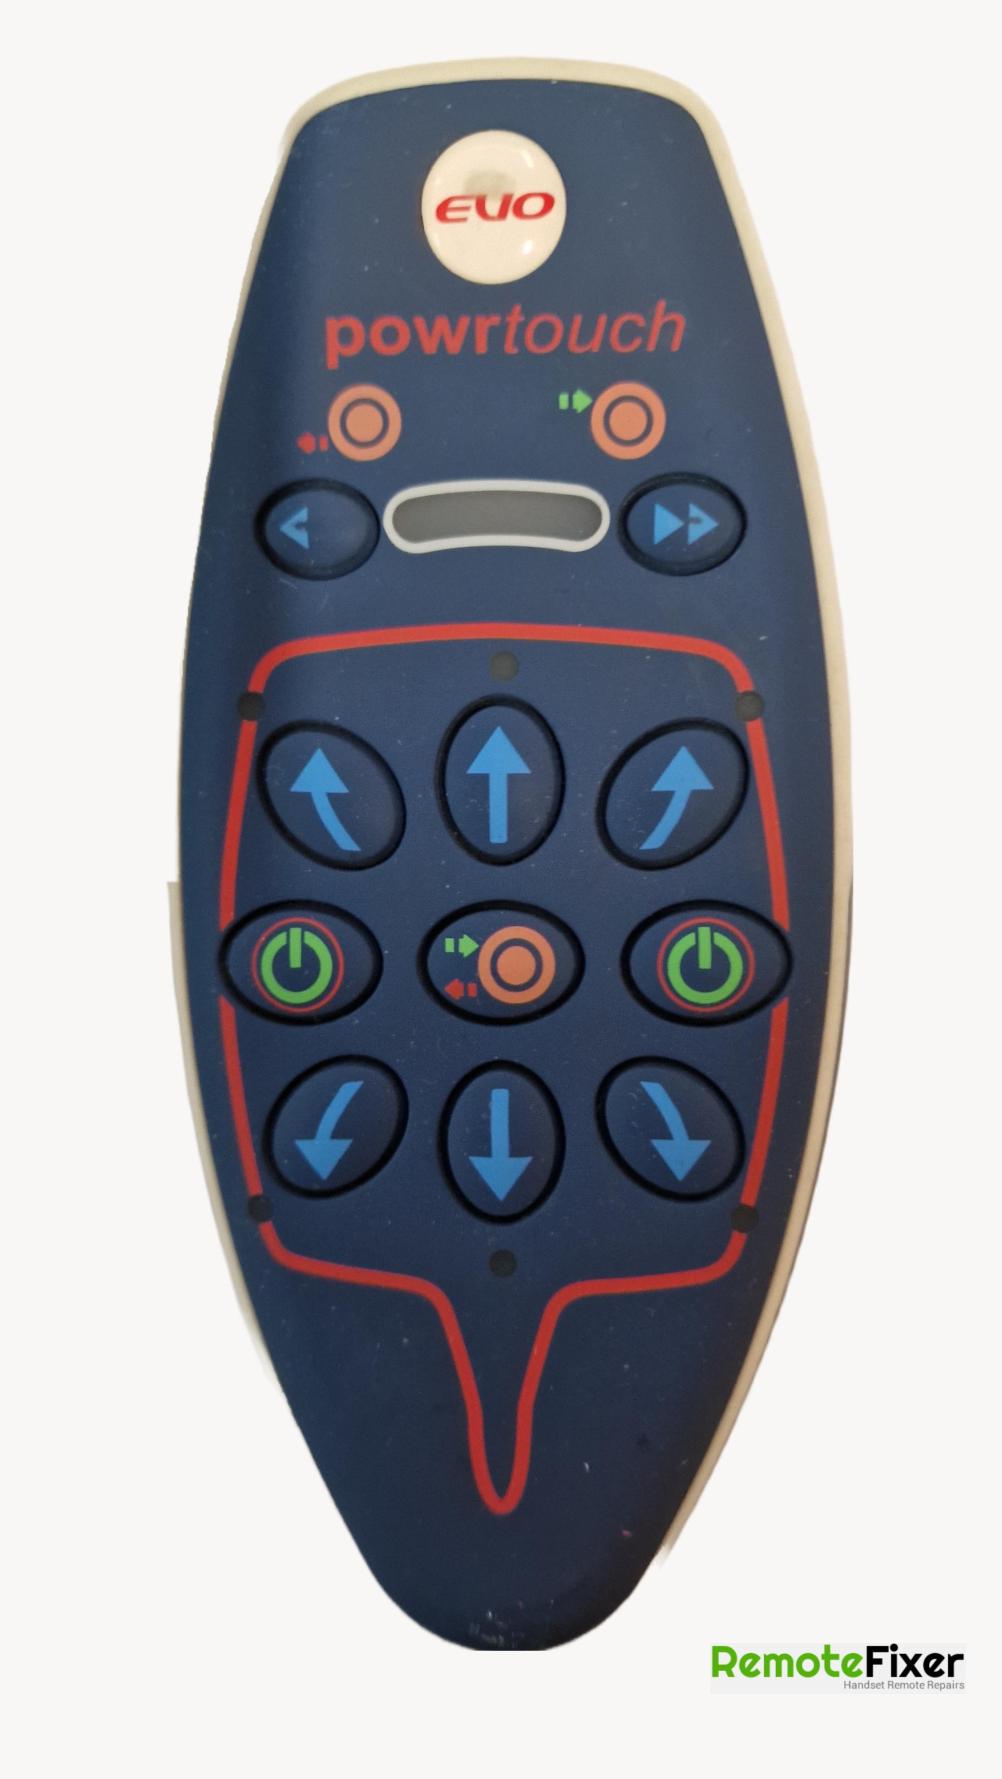 Powertouch  evo Remote Control - Front Image